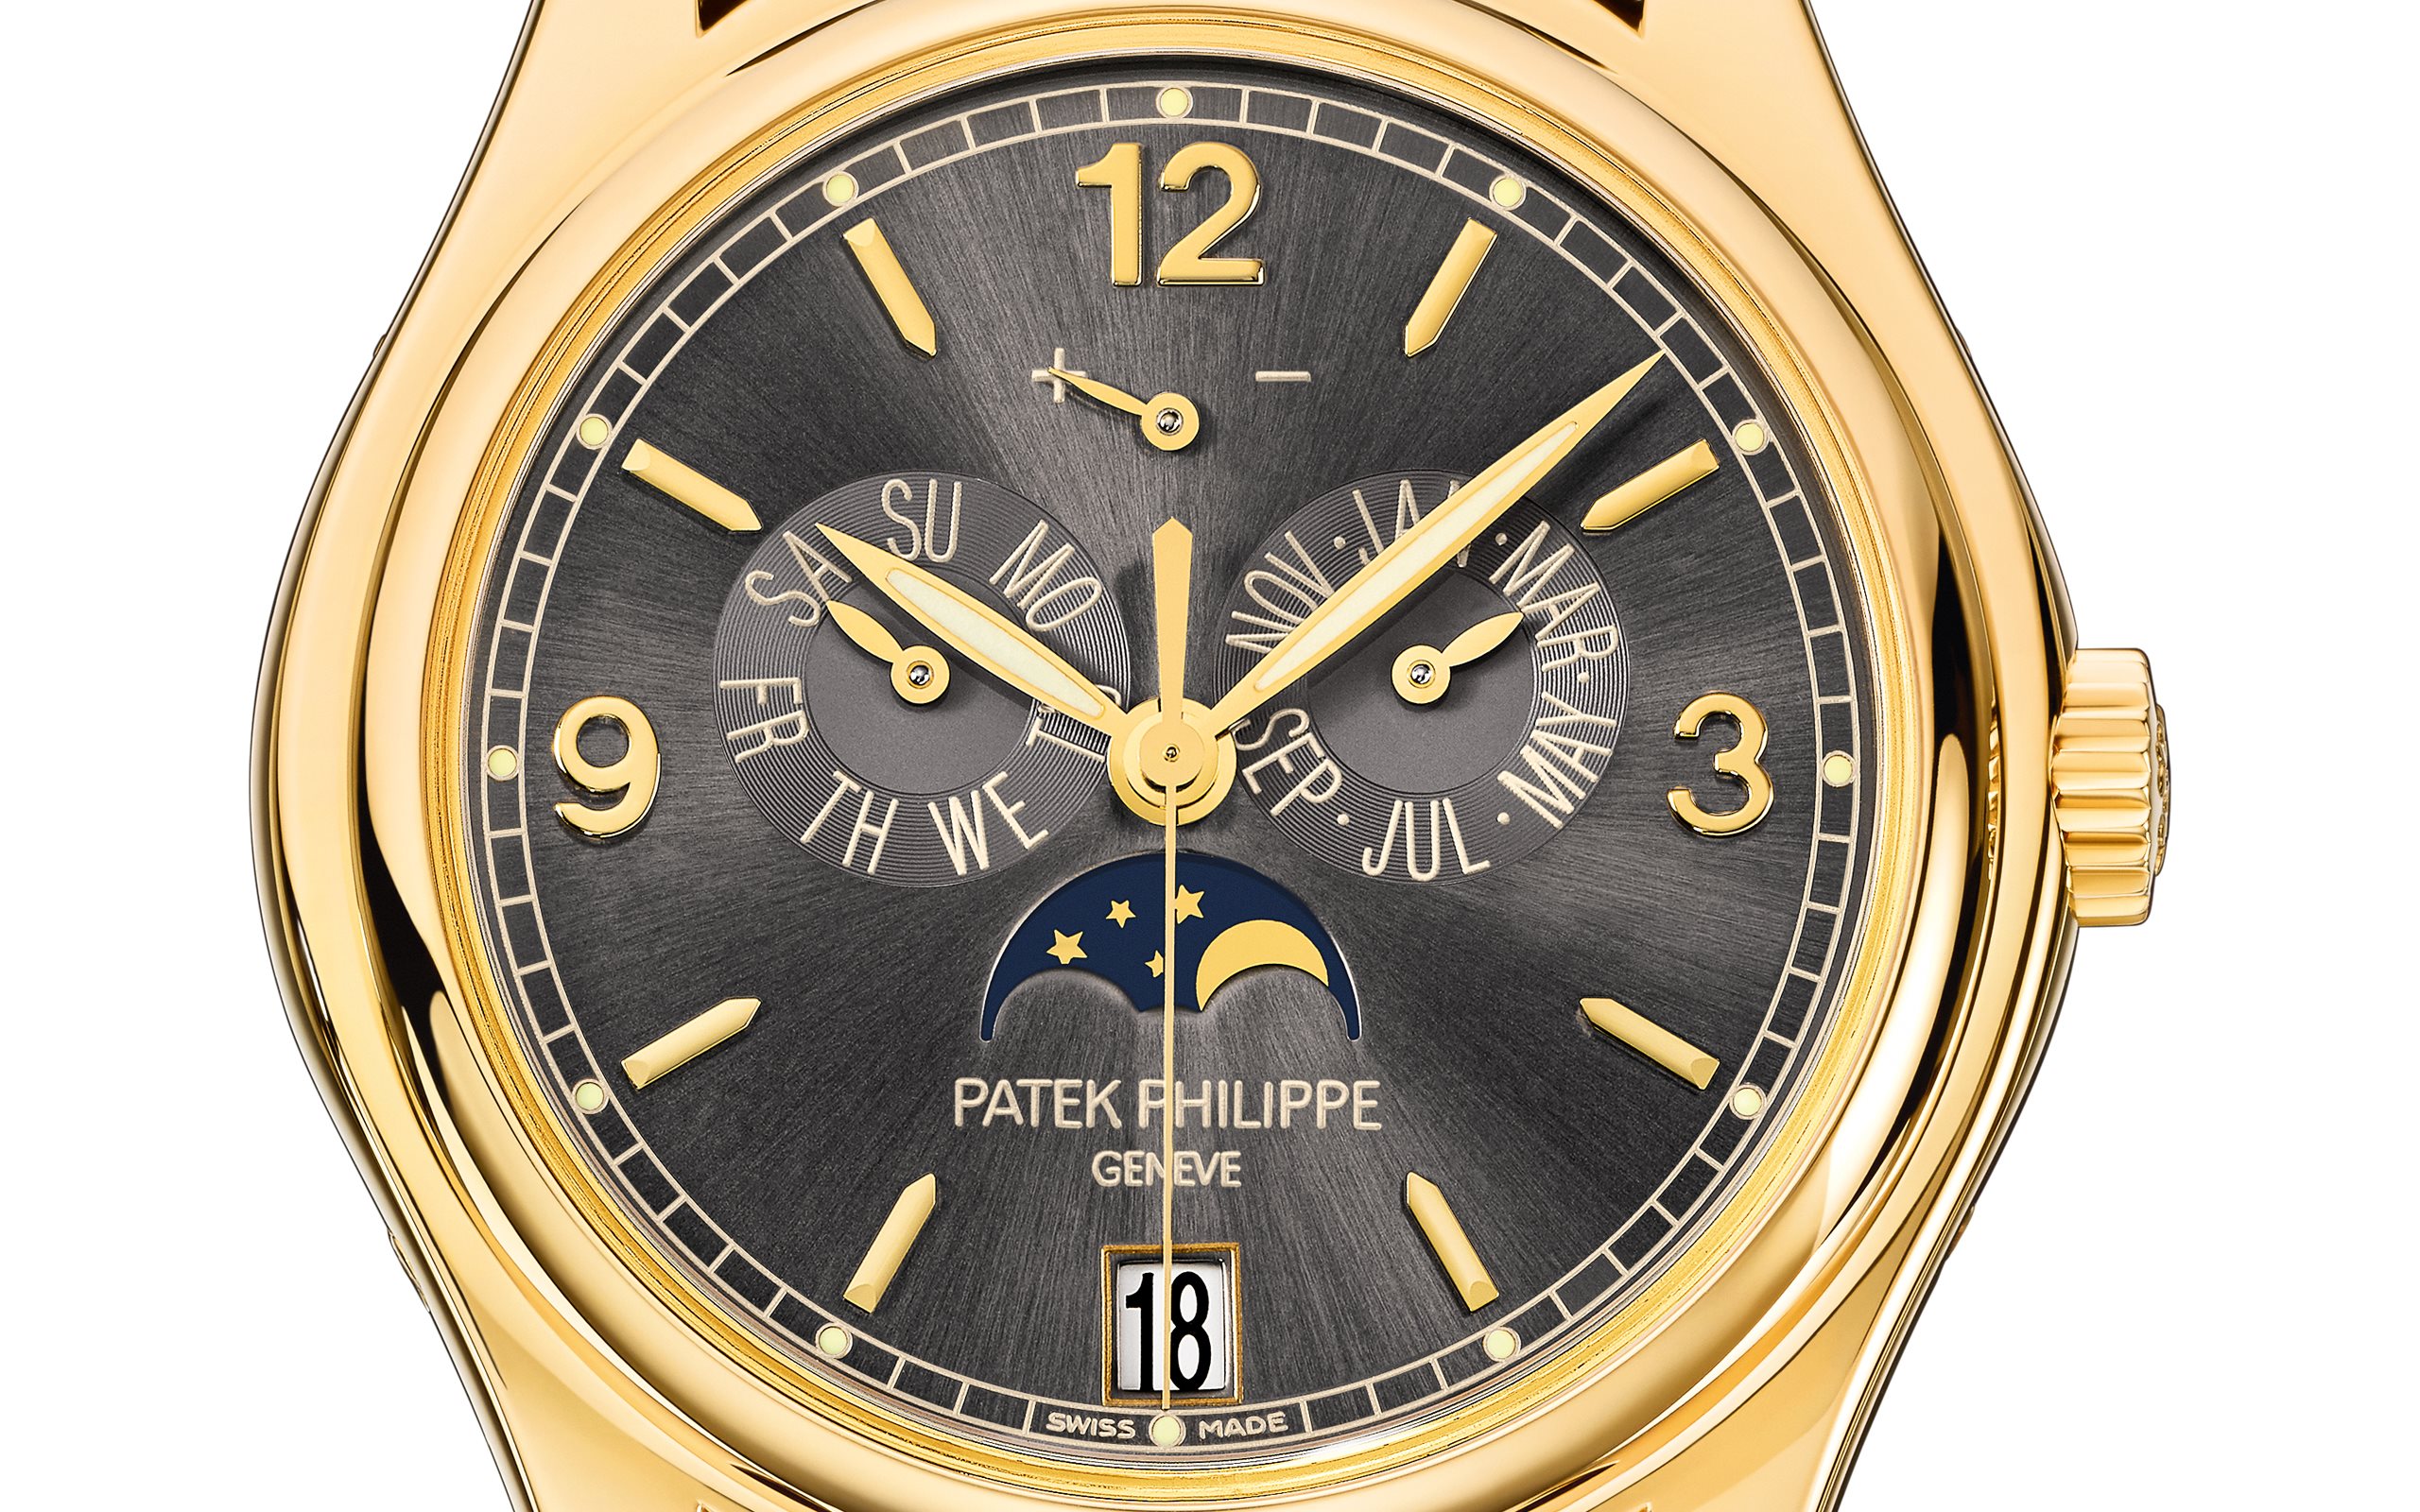 Patek Philippe Patek Philippe Complication World Time Chronograph 5930G-010 Blue Dial New Watch Men's WatchPatek Philippe EWIGER KALENDER - 18ct GOLD - NEW OLD STOCK